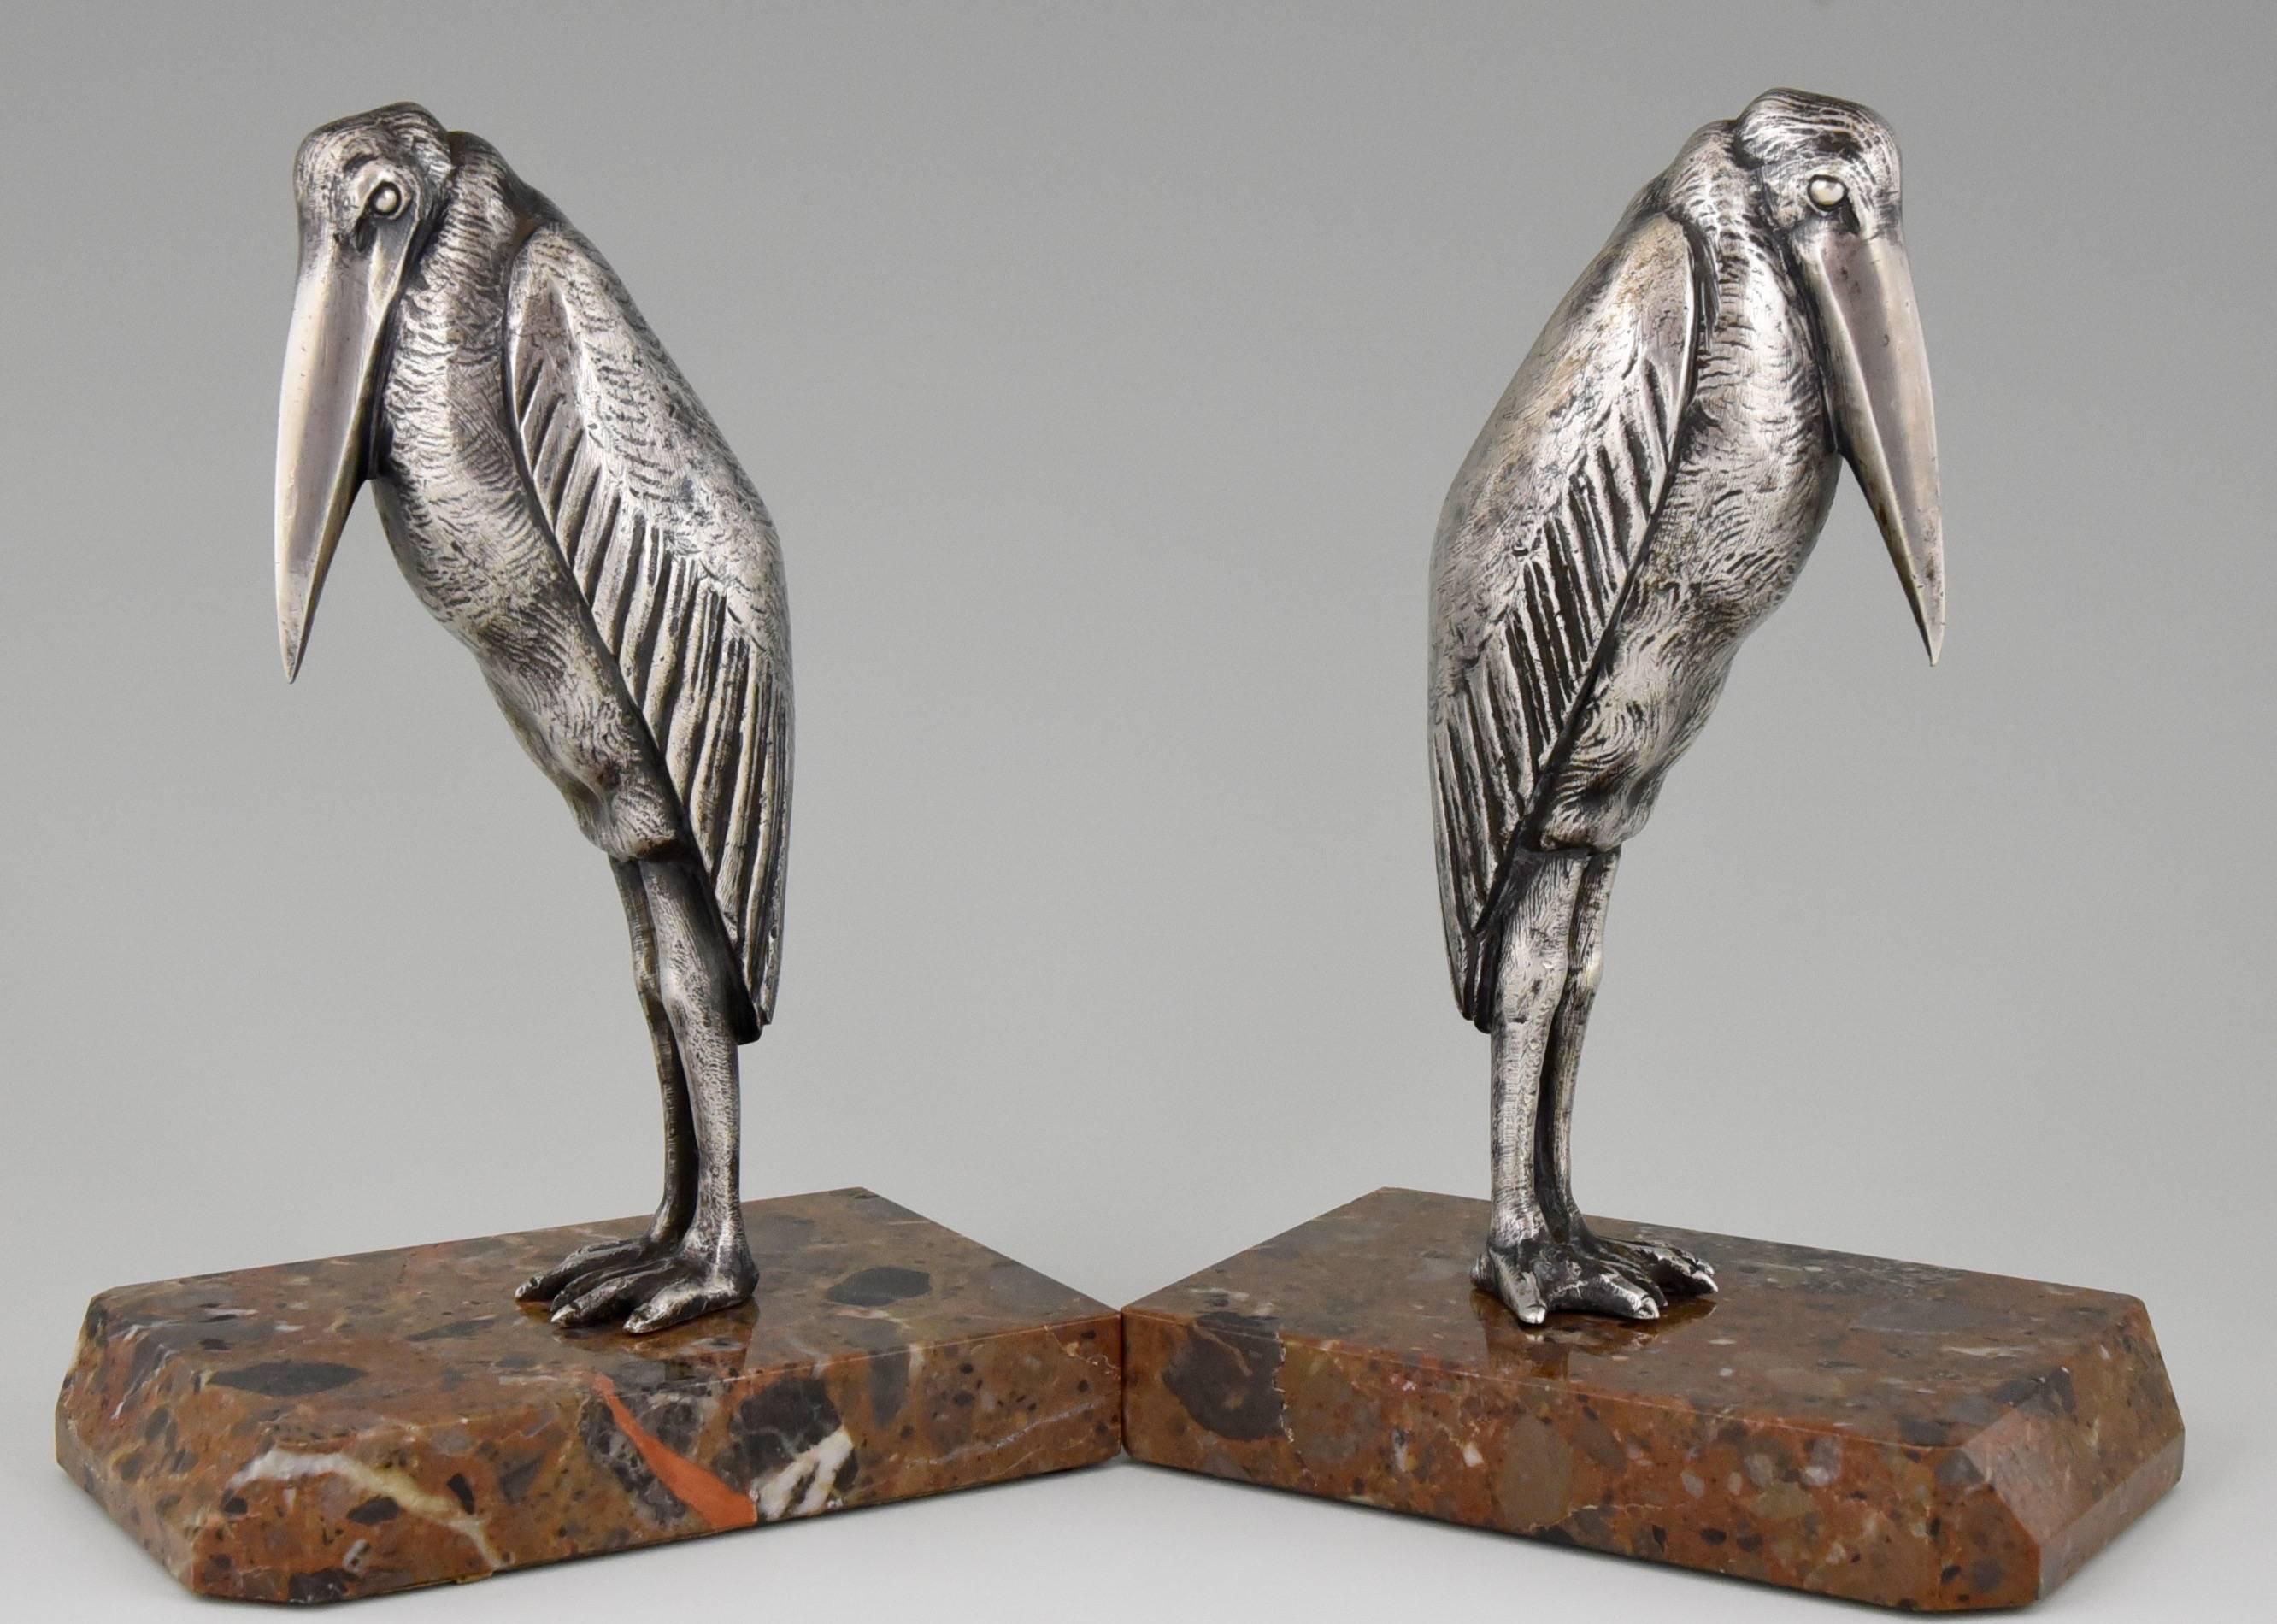 Description: 
Marabou bookends by Claude & Marcel Guillemard. 
Signature/ Marks: 
Claude, Marcel Guillemard foundry, numbered.
Style:
Art Deco.
Date:
circa 1925.
Material: 
Silvered bronze on marble